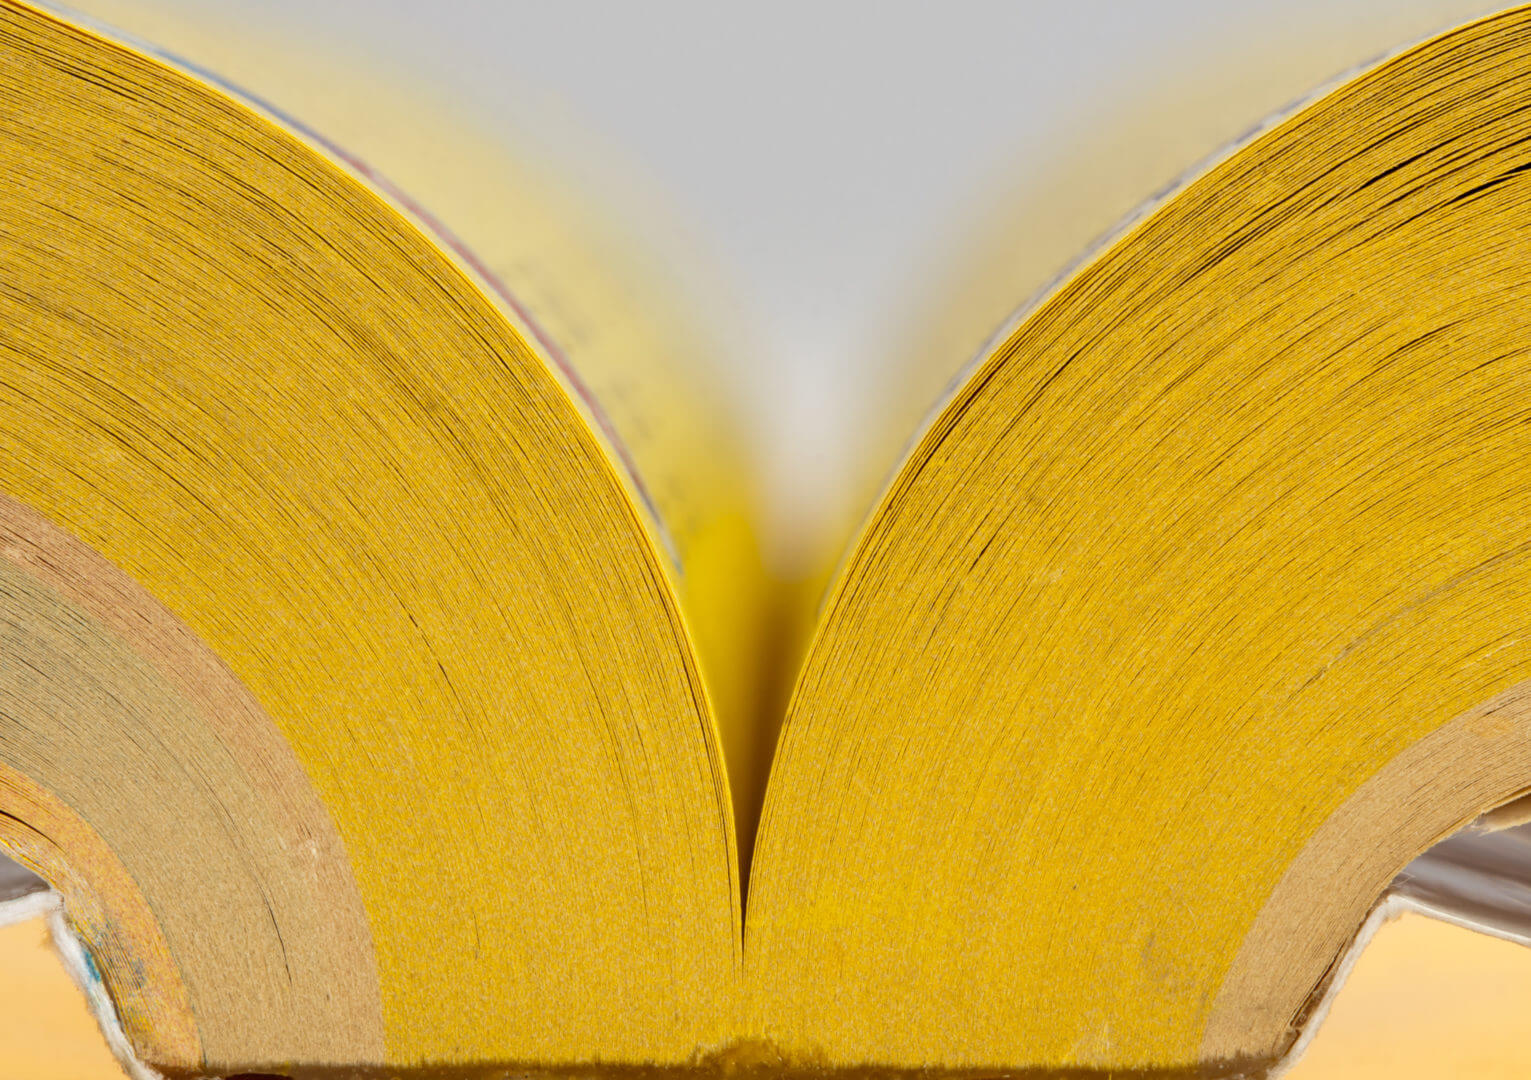 Yellow Pages vs White Pages